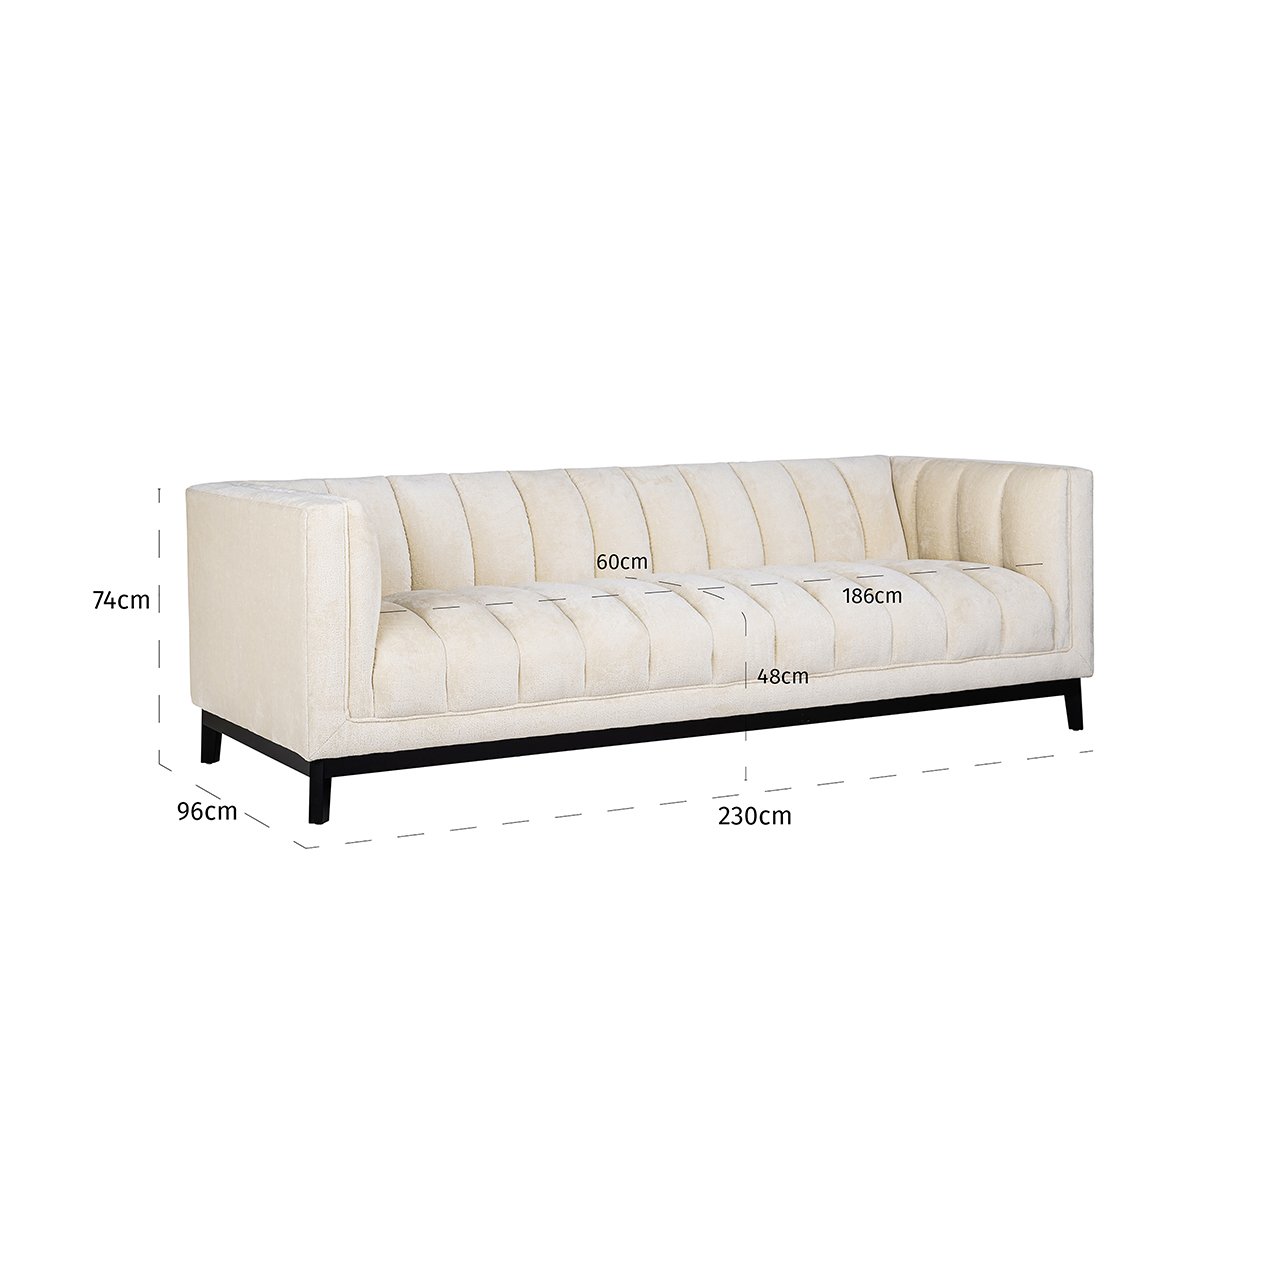 Couch Beaudy white chenille (FR-Bergen 900 white chenille)